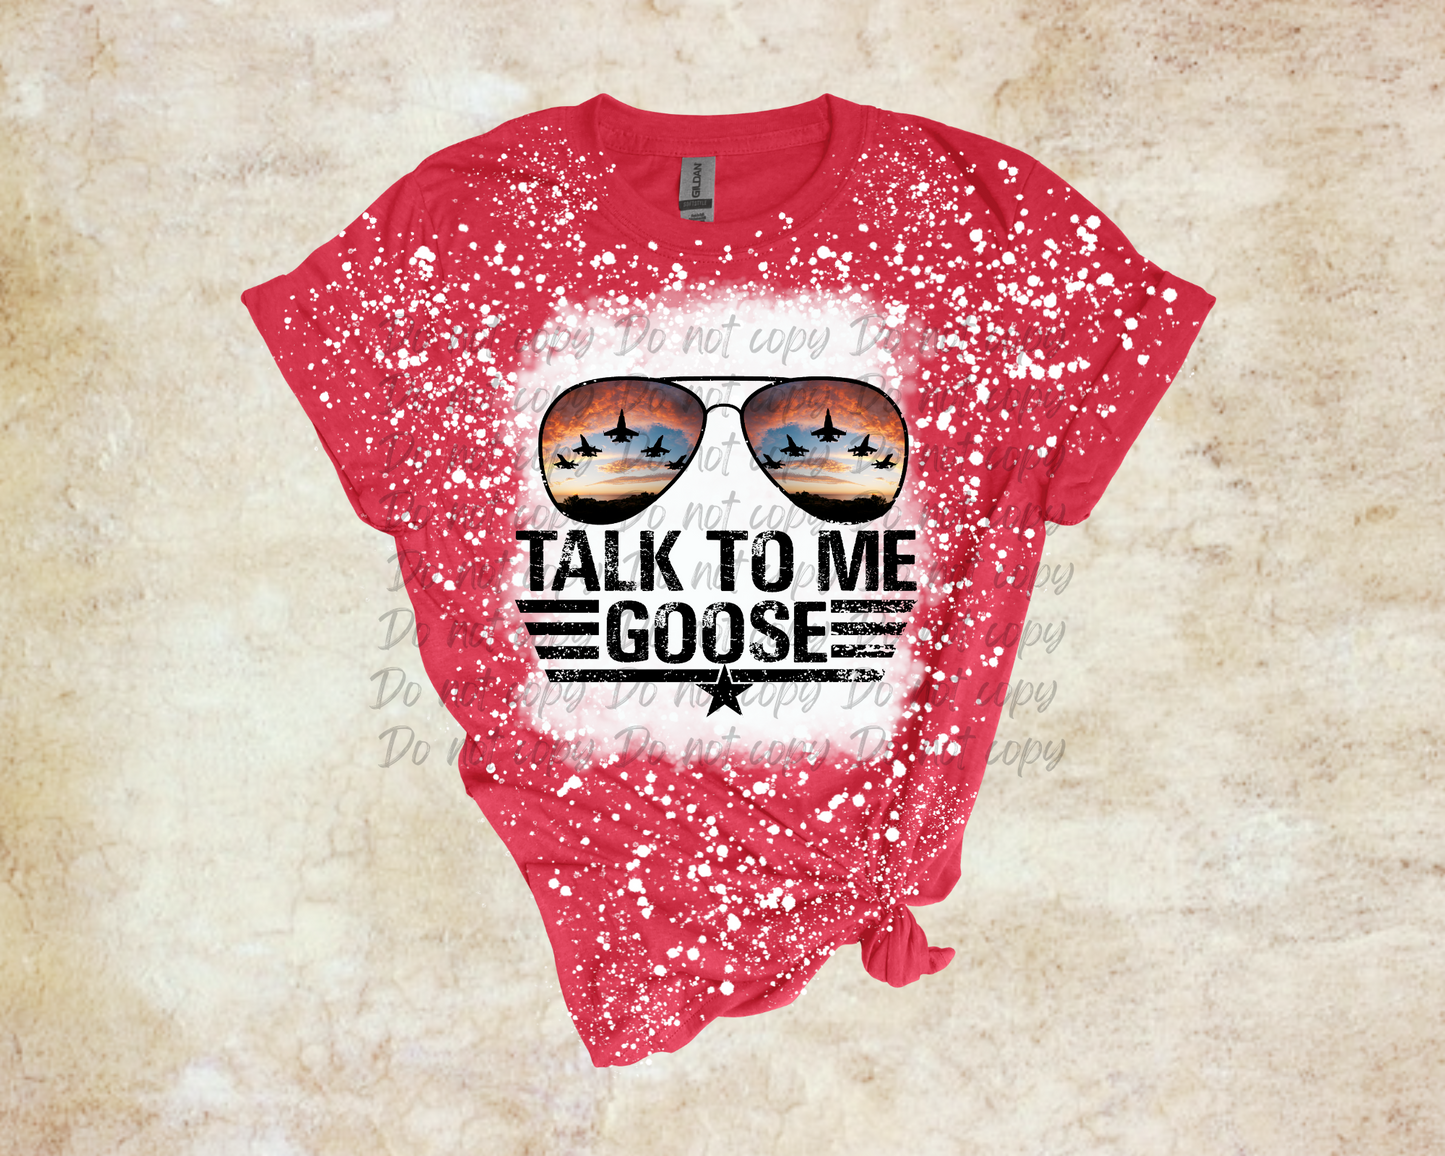 Talk to me goose fighter jet glasses bleached shirt - Mayan Sub Shop